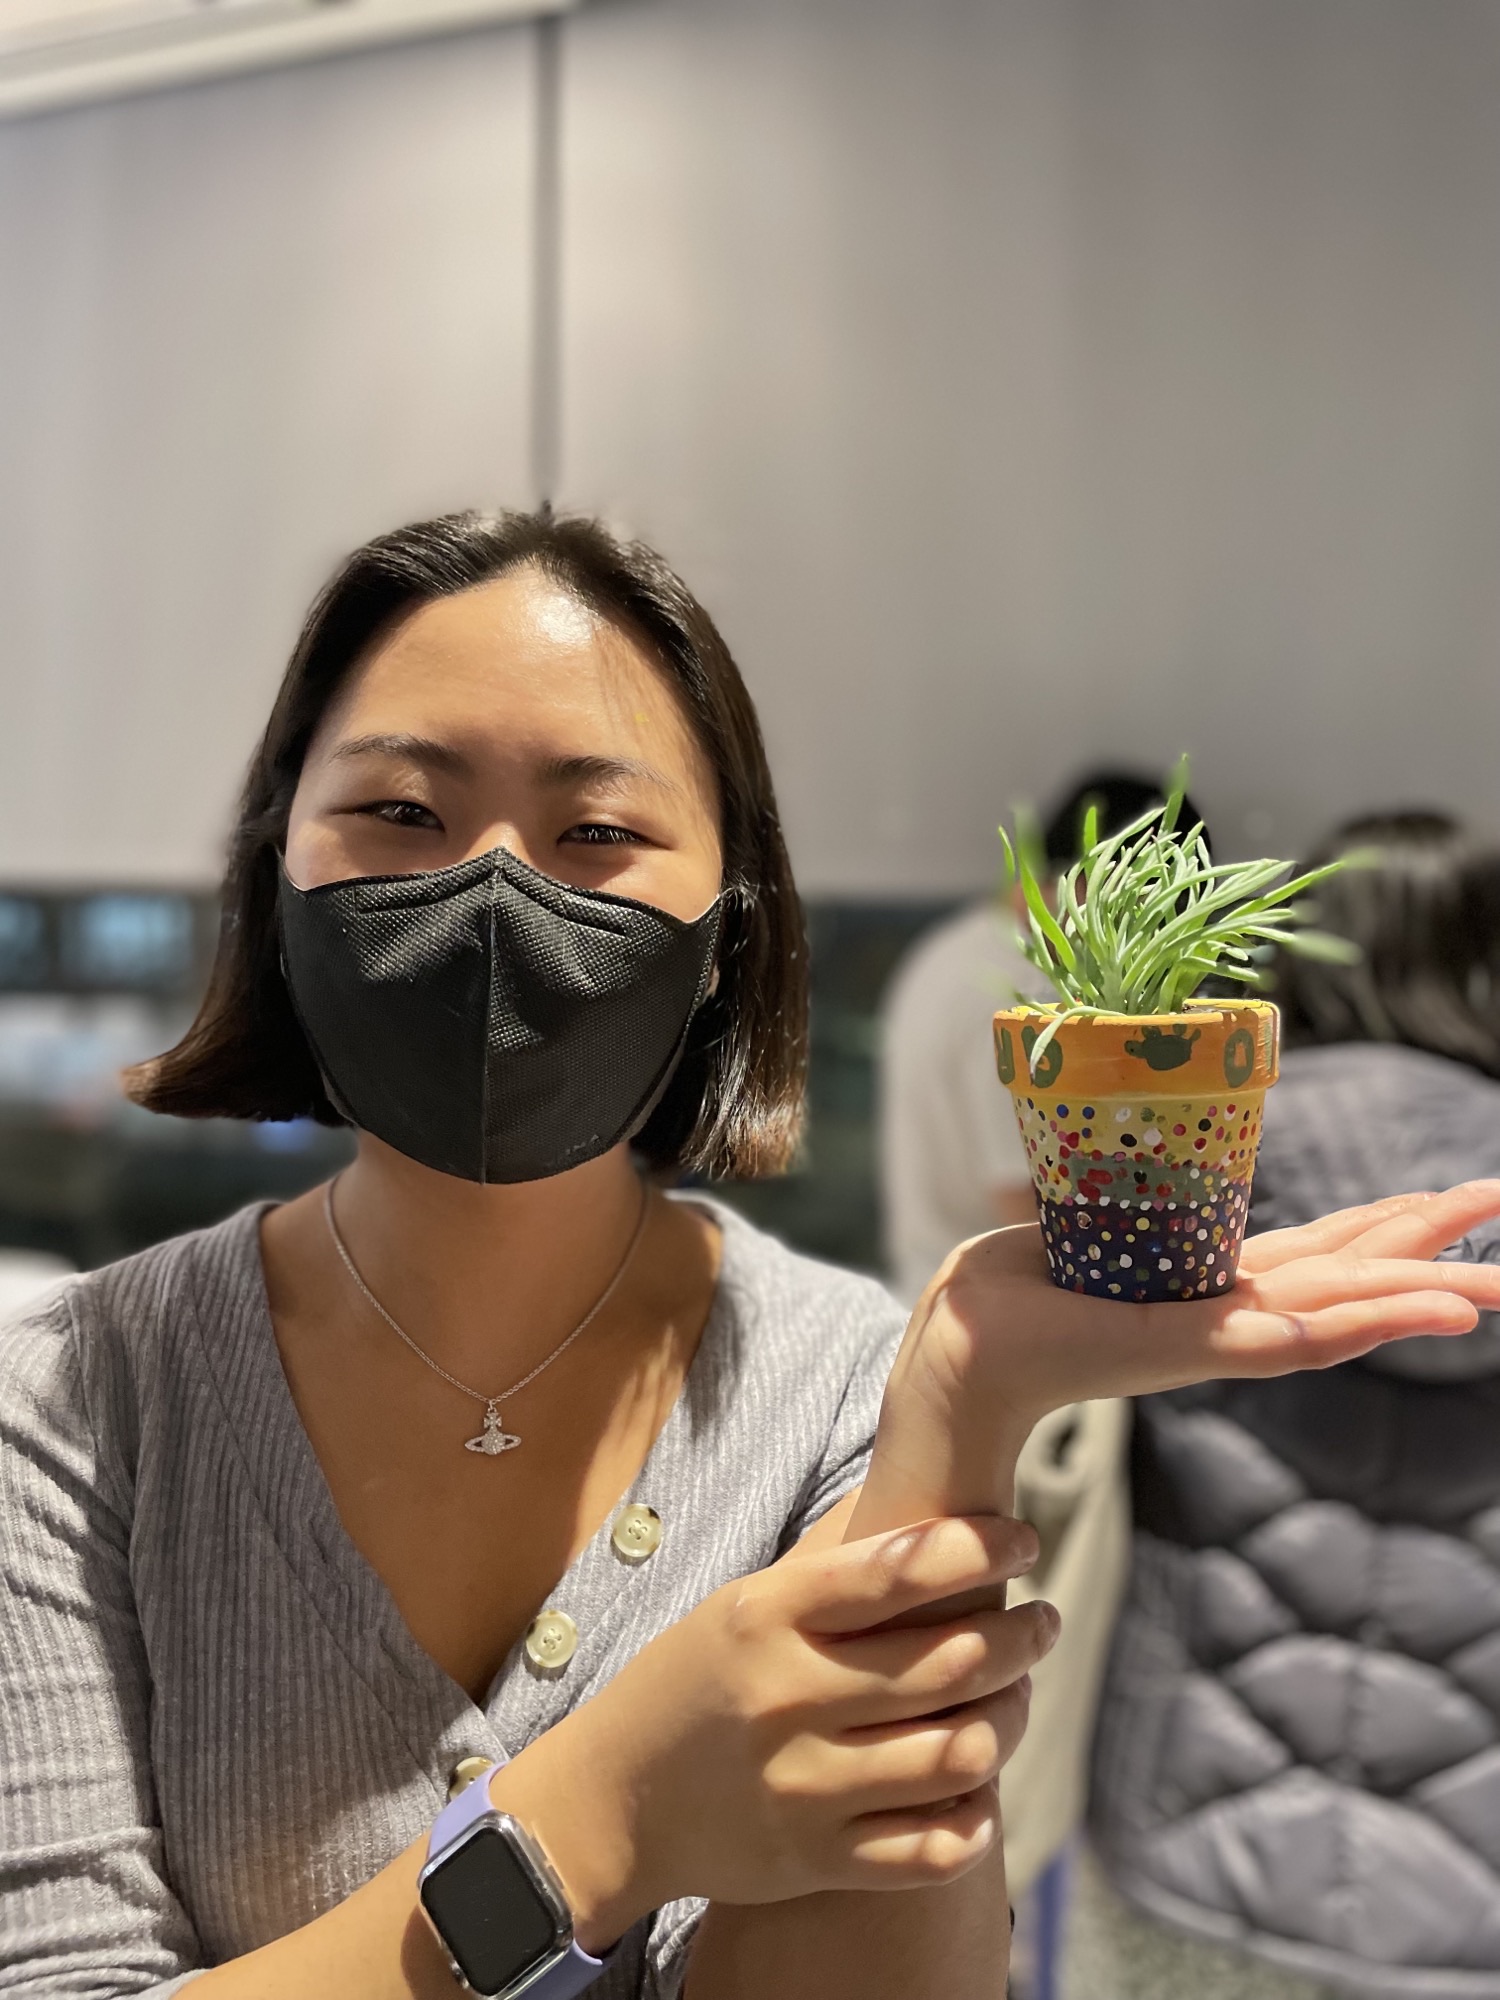 A student wearing a mask poses with a potted plant